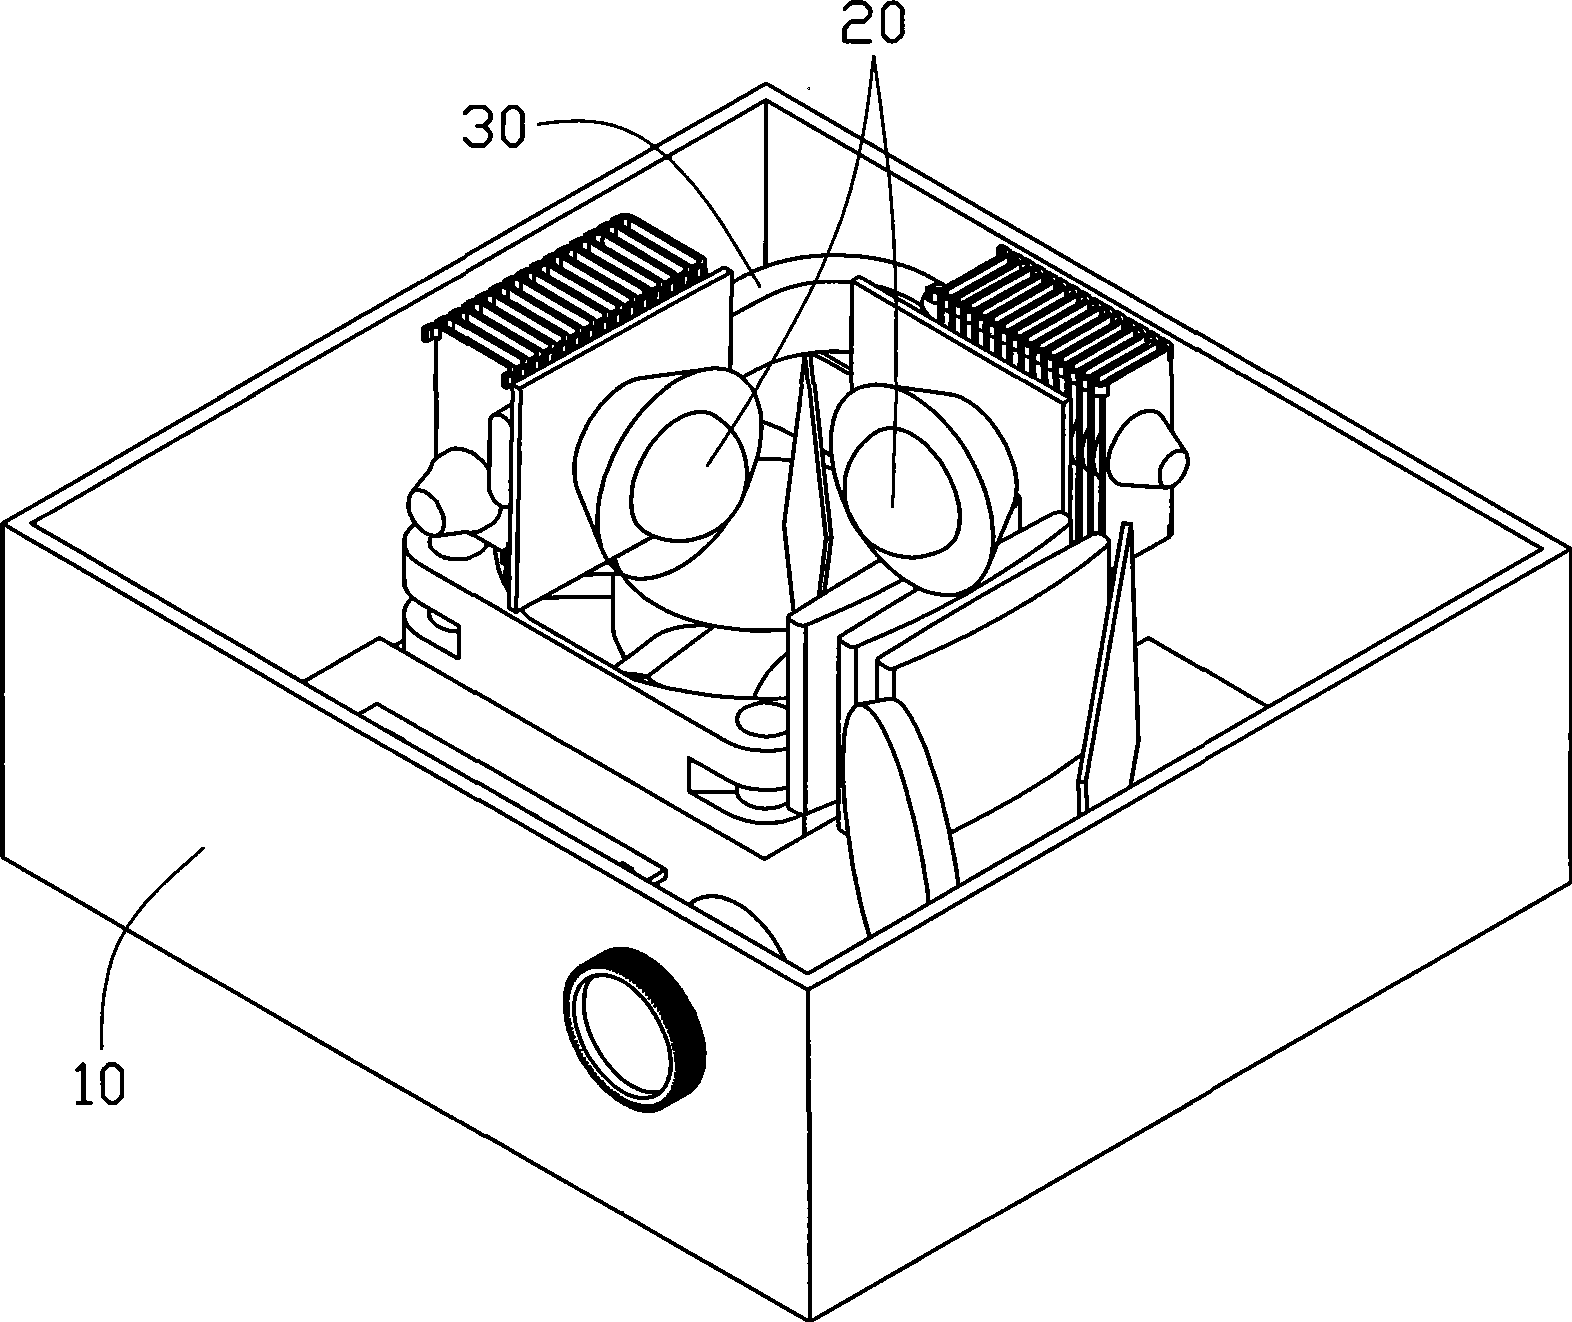 Projection apparatus with cooling structure